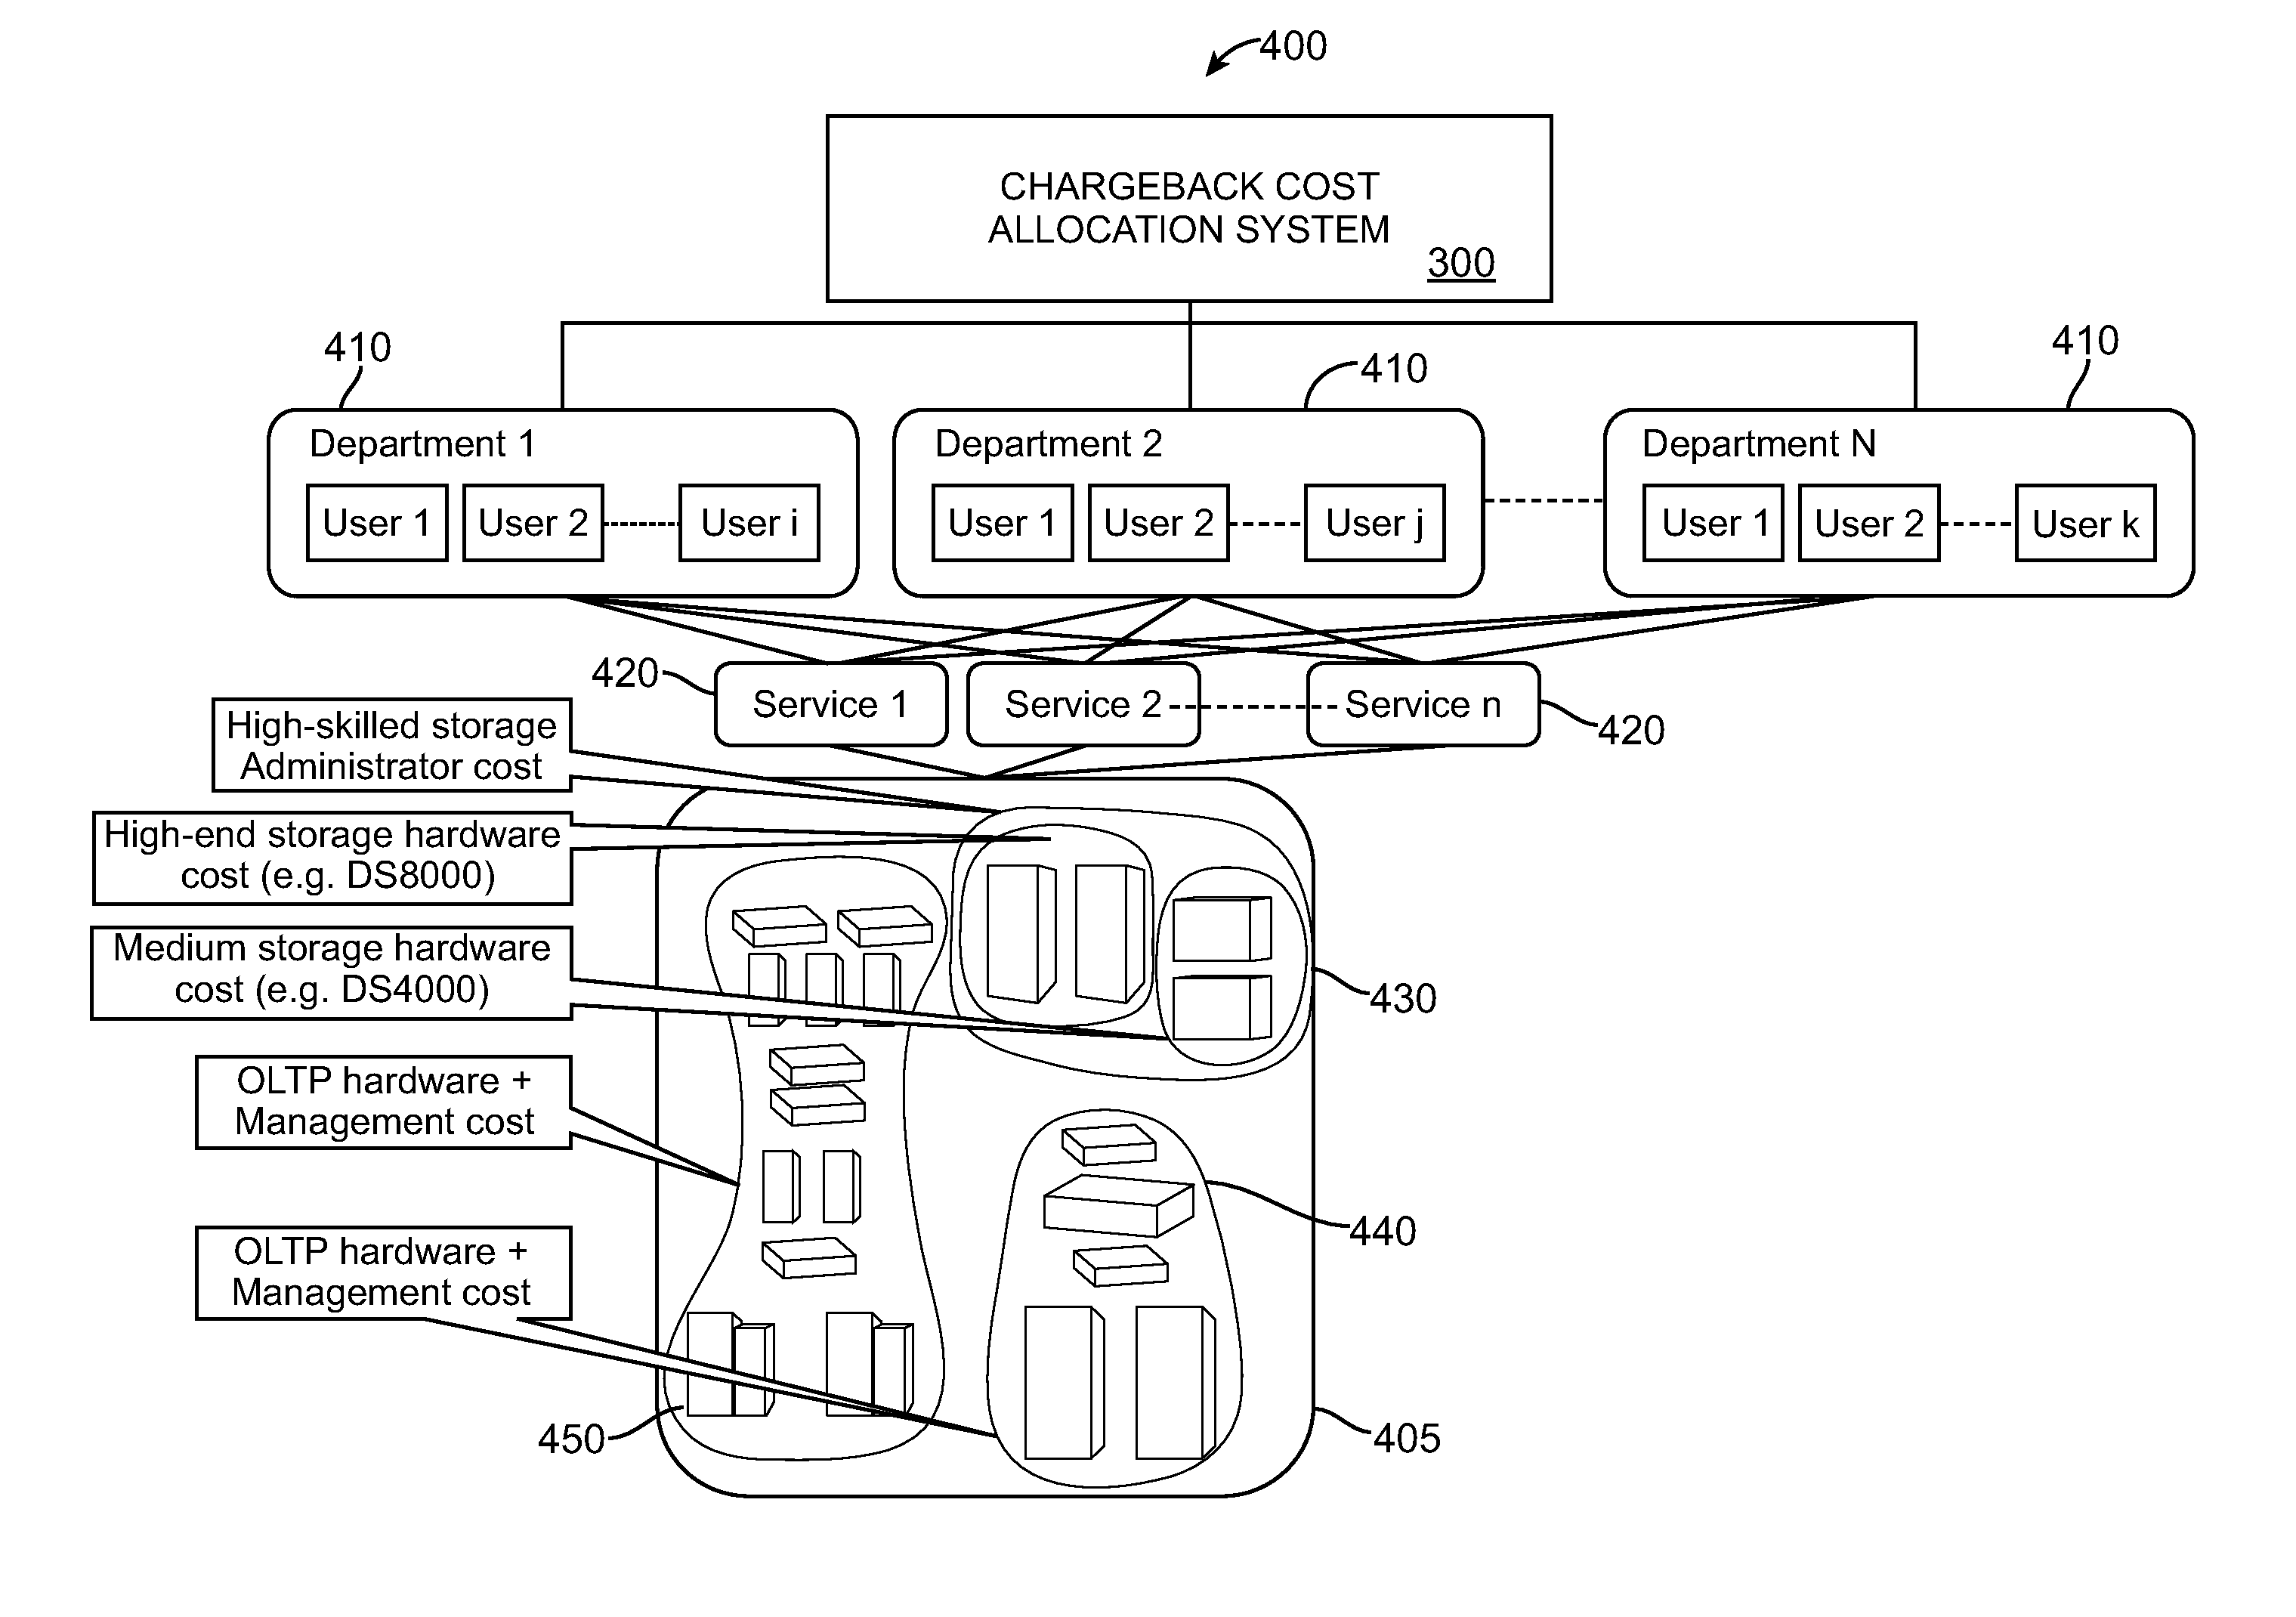 Method and system for chargeback allocation in information technology systems